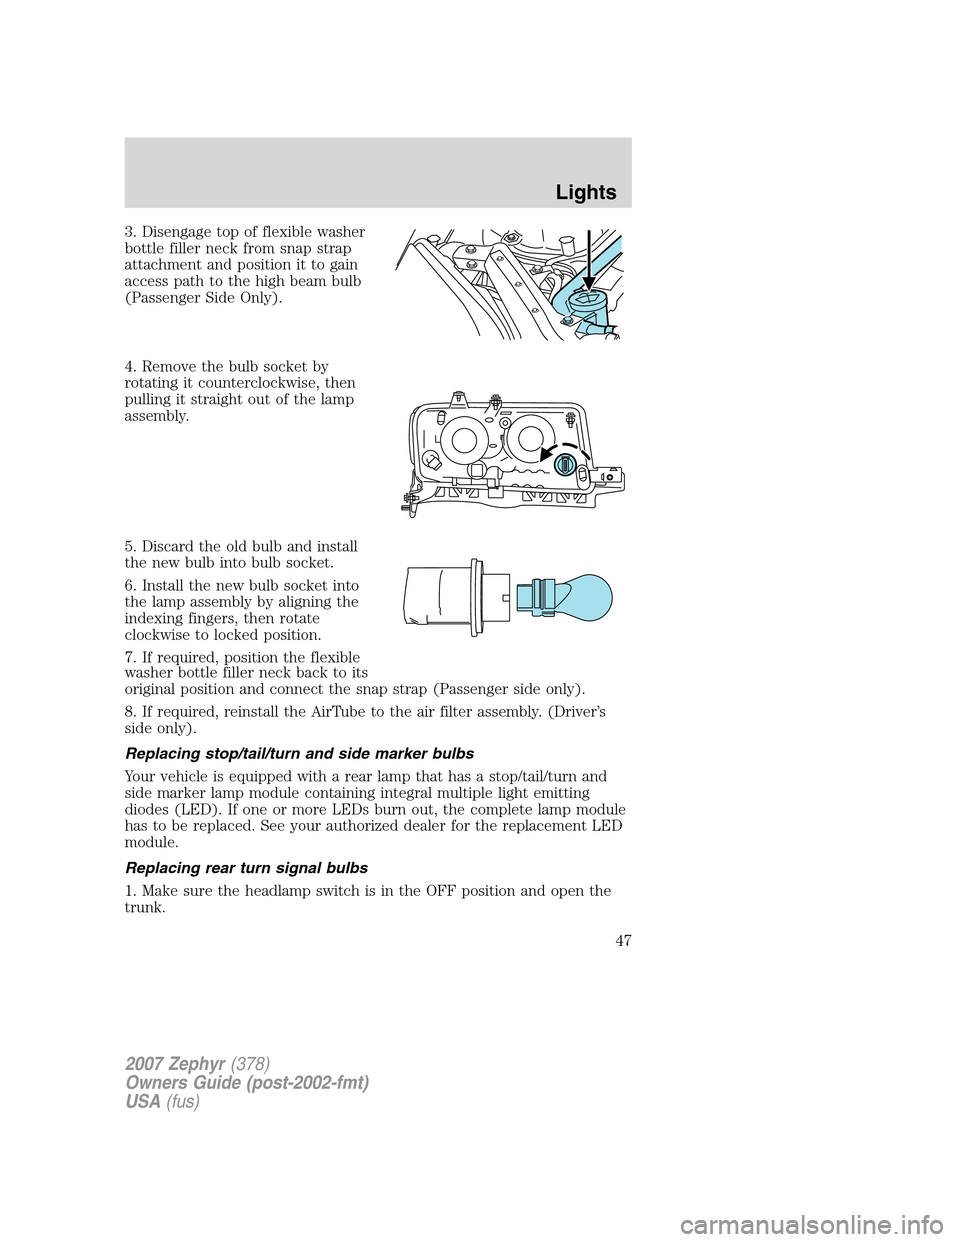 LINCOLN MKZ 2007  Owners Manual 3. Disengage top of flexible washer
bottle filler neck from snap strap
attachment and position it to gain
access path to the high beam bulb
(Passenger Side Only).
4. Remove the bulb socket by
rotating